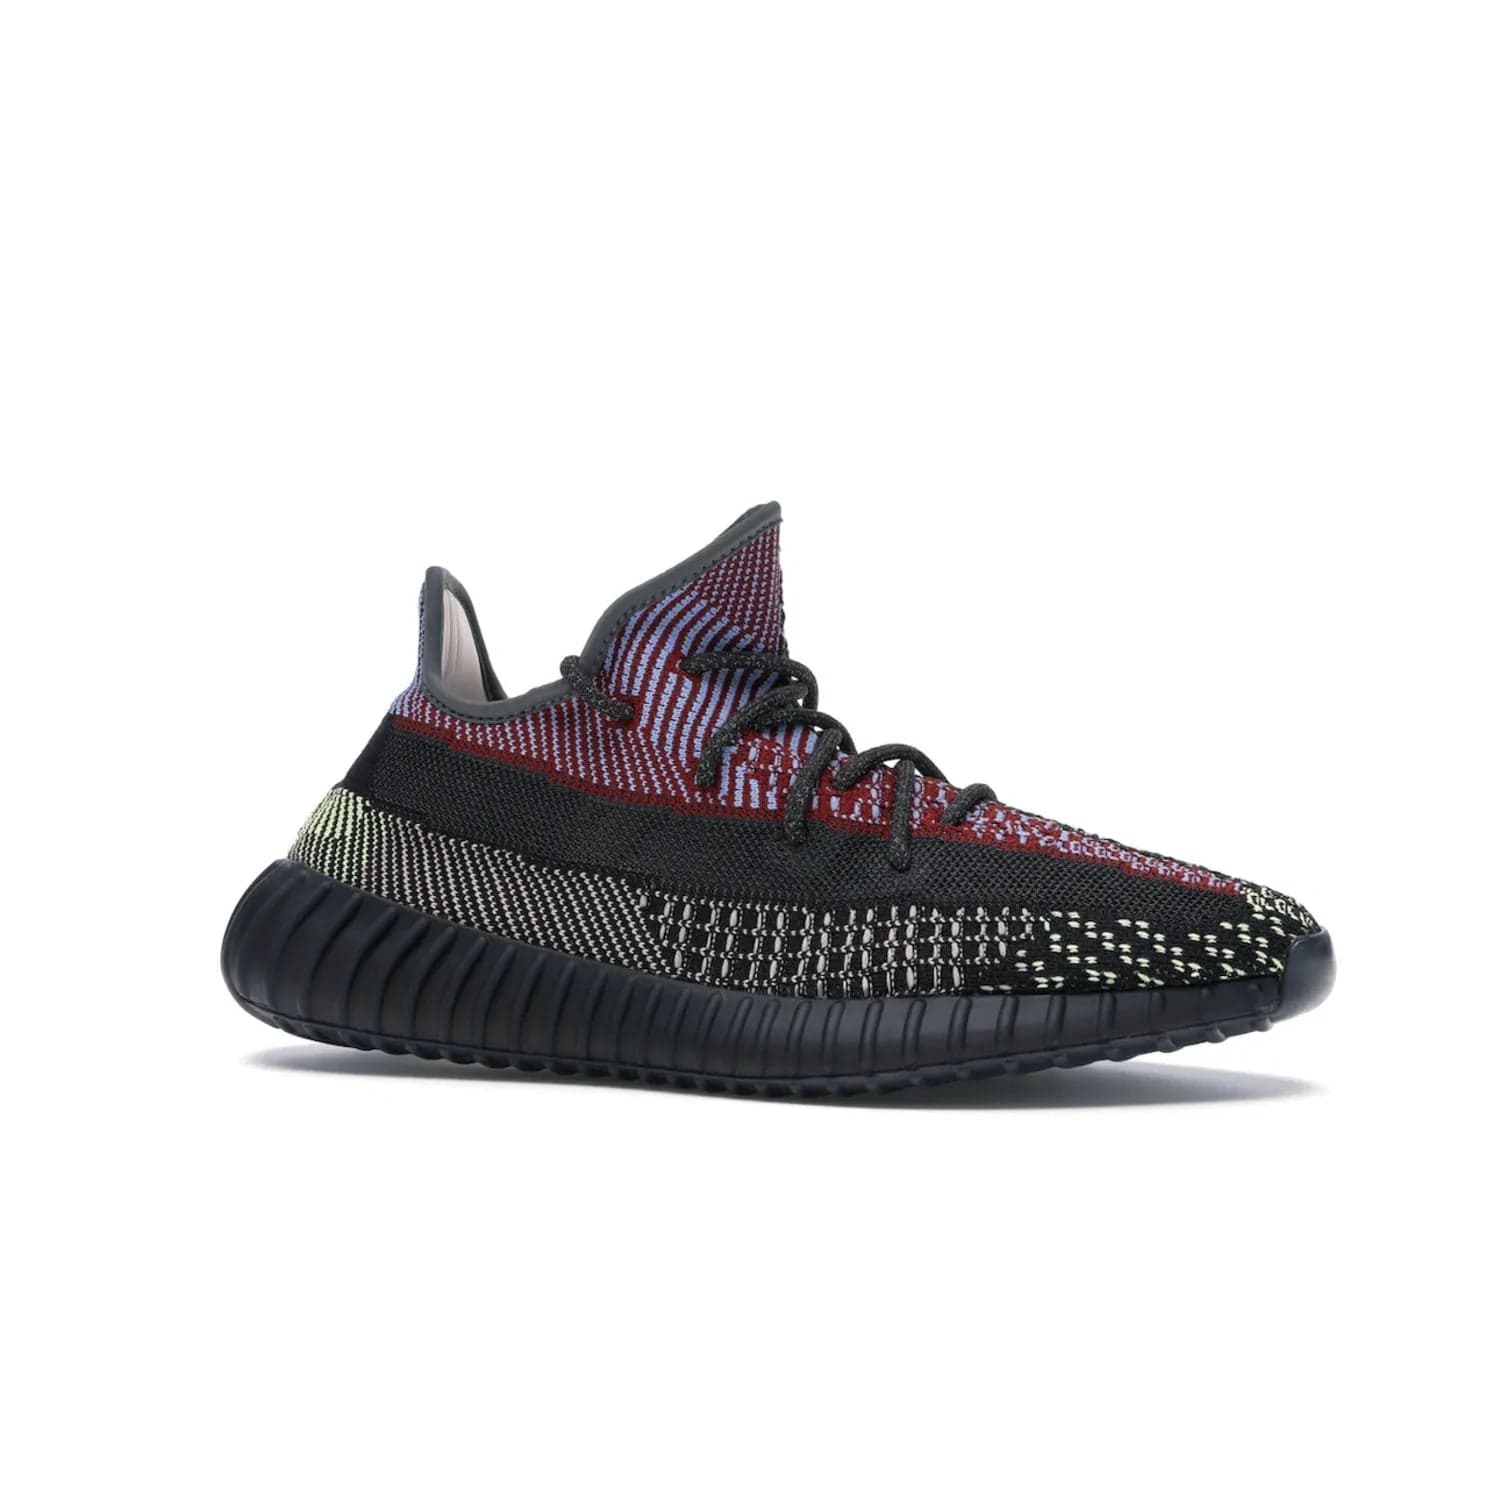 adidas Yeezy Boost 350 V2 Yecheil (Non-Reflective) - Image 3 - Only at www.BallersClubKickz.com - Make a statement with the eye-catching adidas Yeezy Boost 350 V2 Yecheil Non-Reflective. Featuring a spectrum of colorful hues, black upper, Boost cushioning, and black side stripe, the sneaker brings a luxe yet playful finish to any outfit.